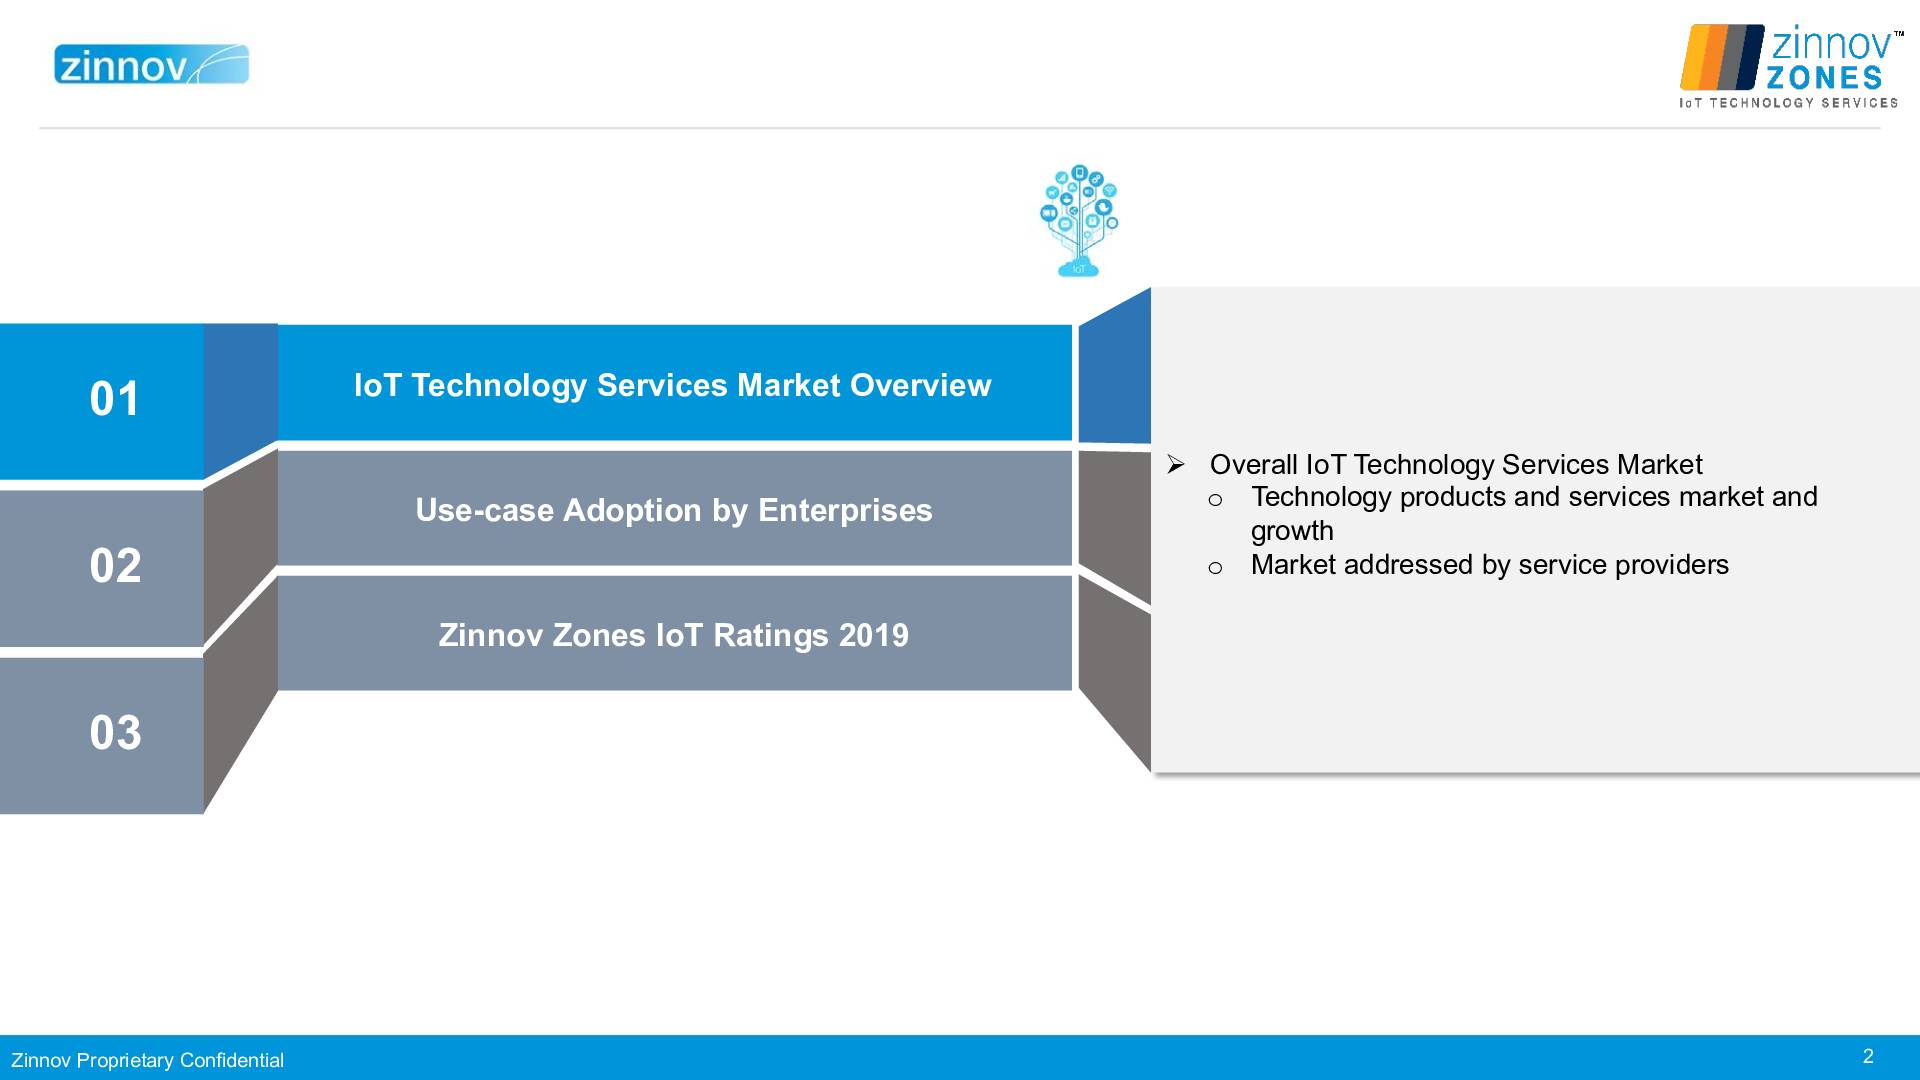 Zinnov Zones Iot Technology Services 2019 Ratings2